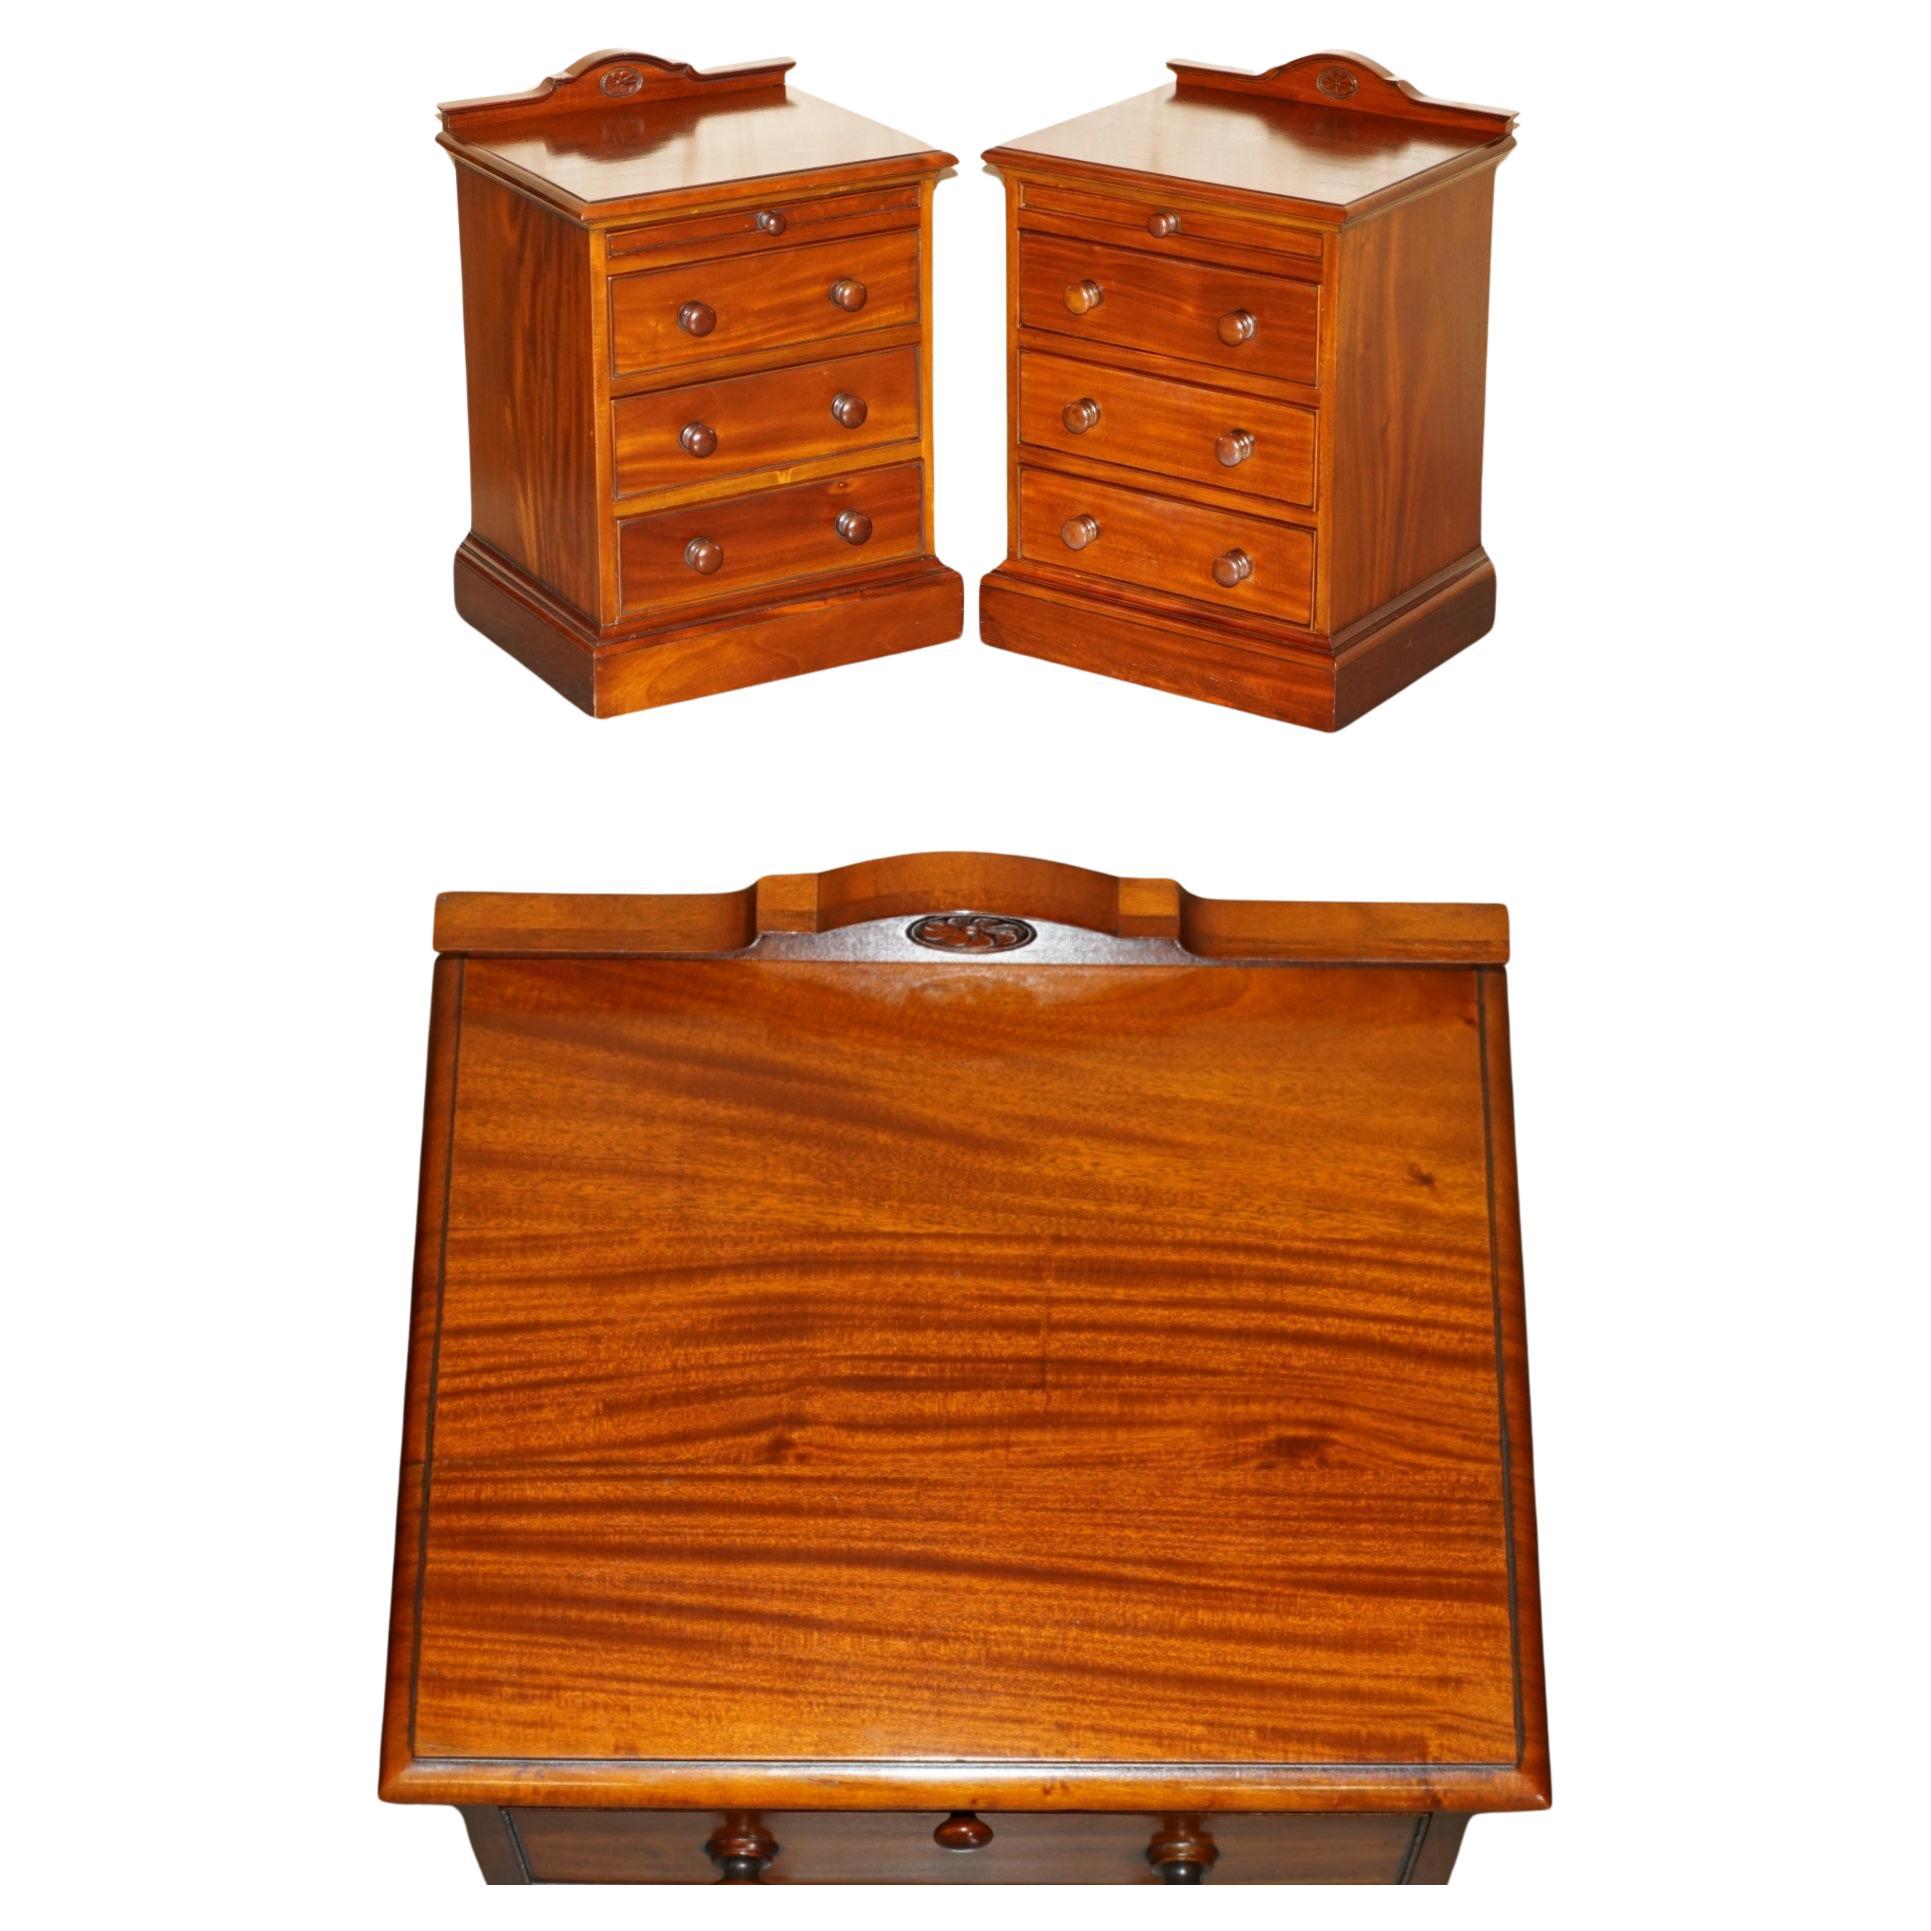 PAIR OF VINTAGE FLAMED HARDWOOD BEDSIDE TABLE NiGHTSTAND DRAWERS PART SUITE For Sale